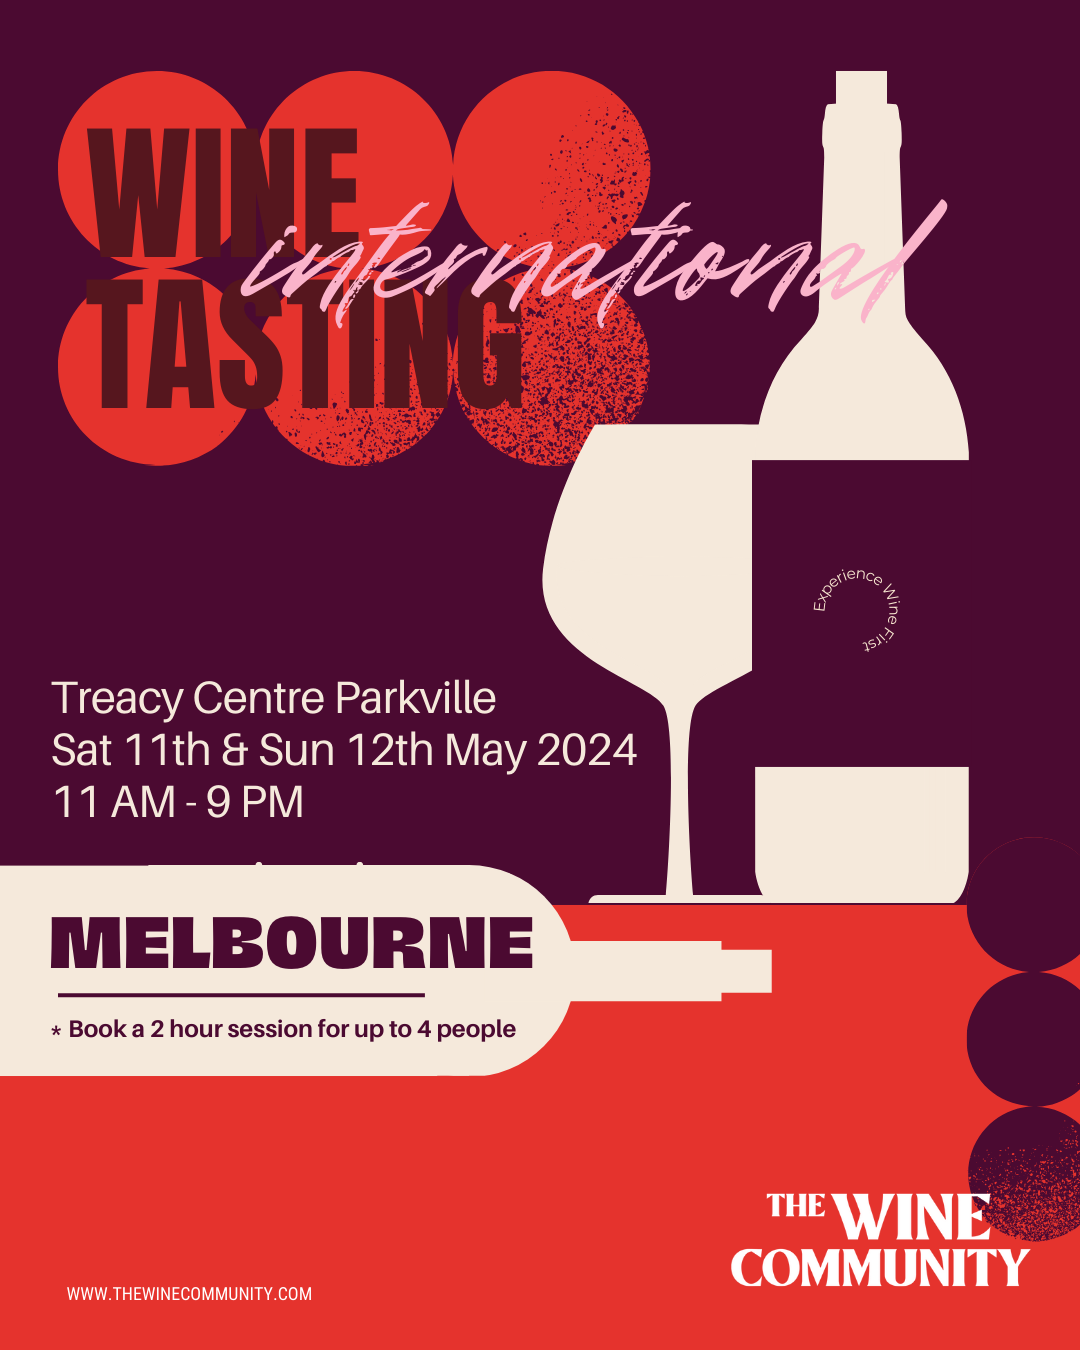 WINE TASTING at Melbourne- Sunday 12 May 2024